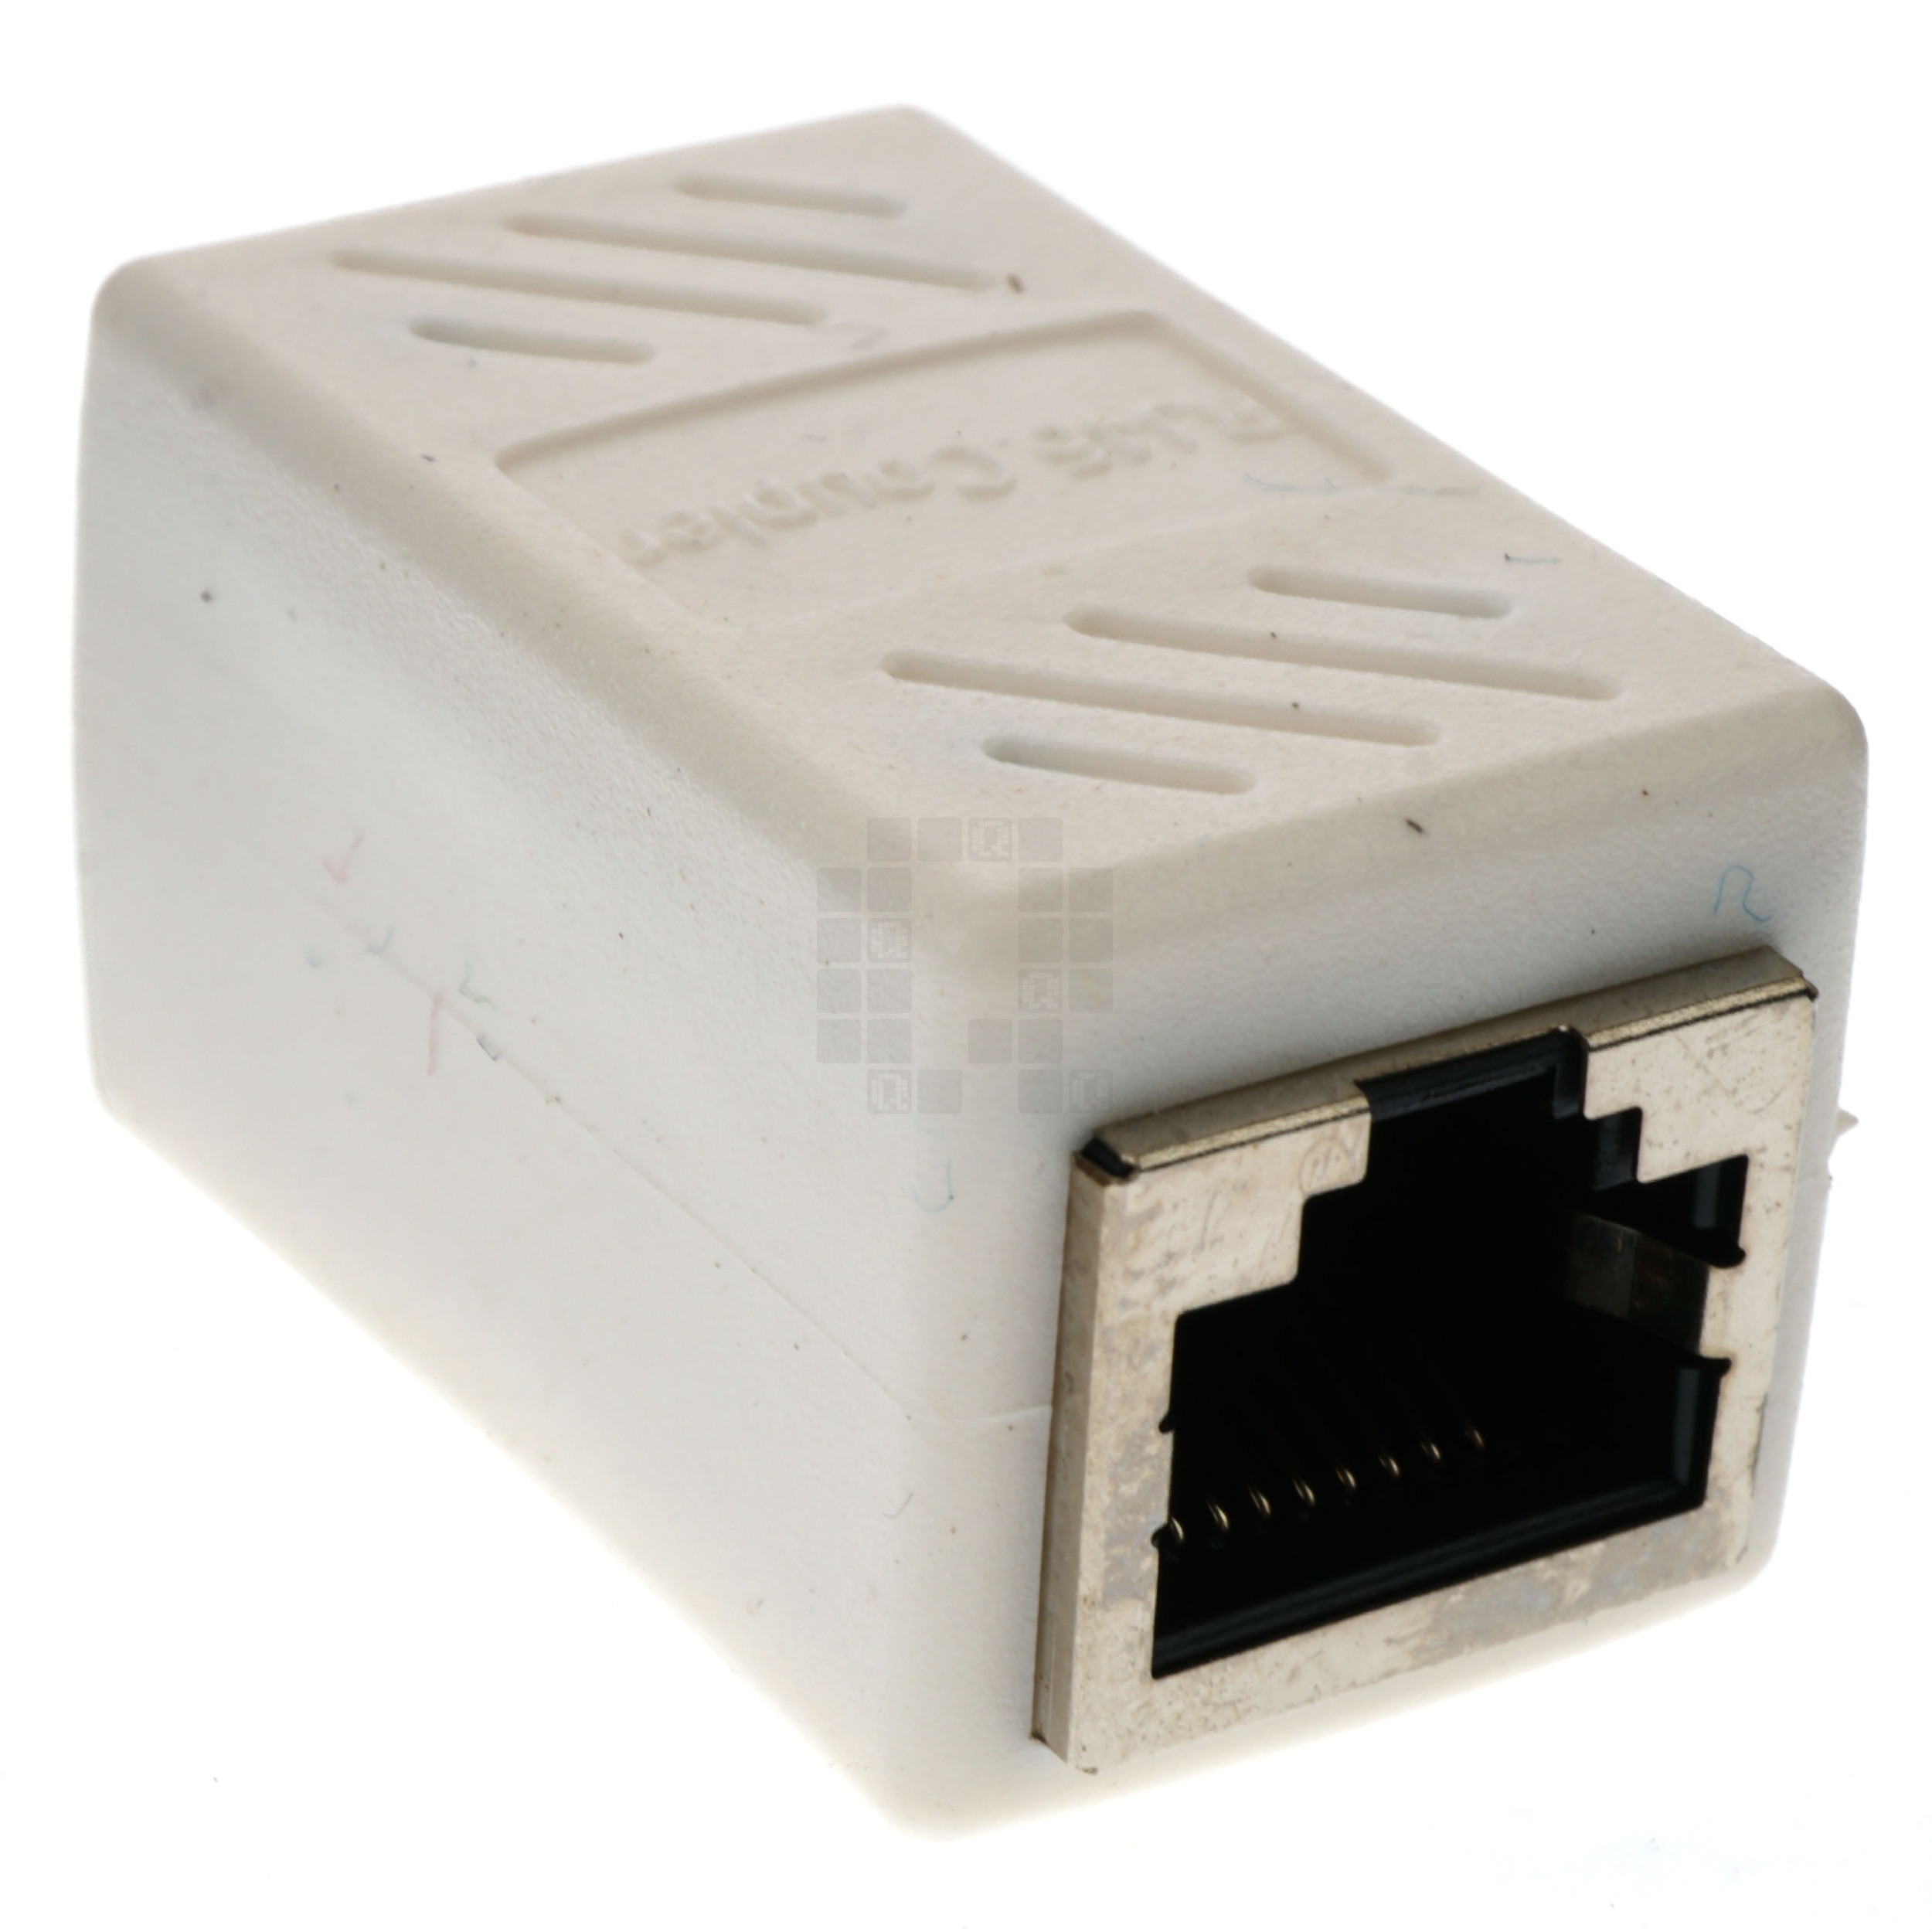 RJ45 CAT6 CAT5e Inline Ethernet Network Cable Coupler Connector, White